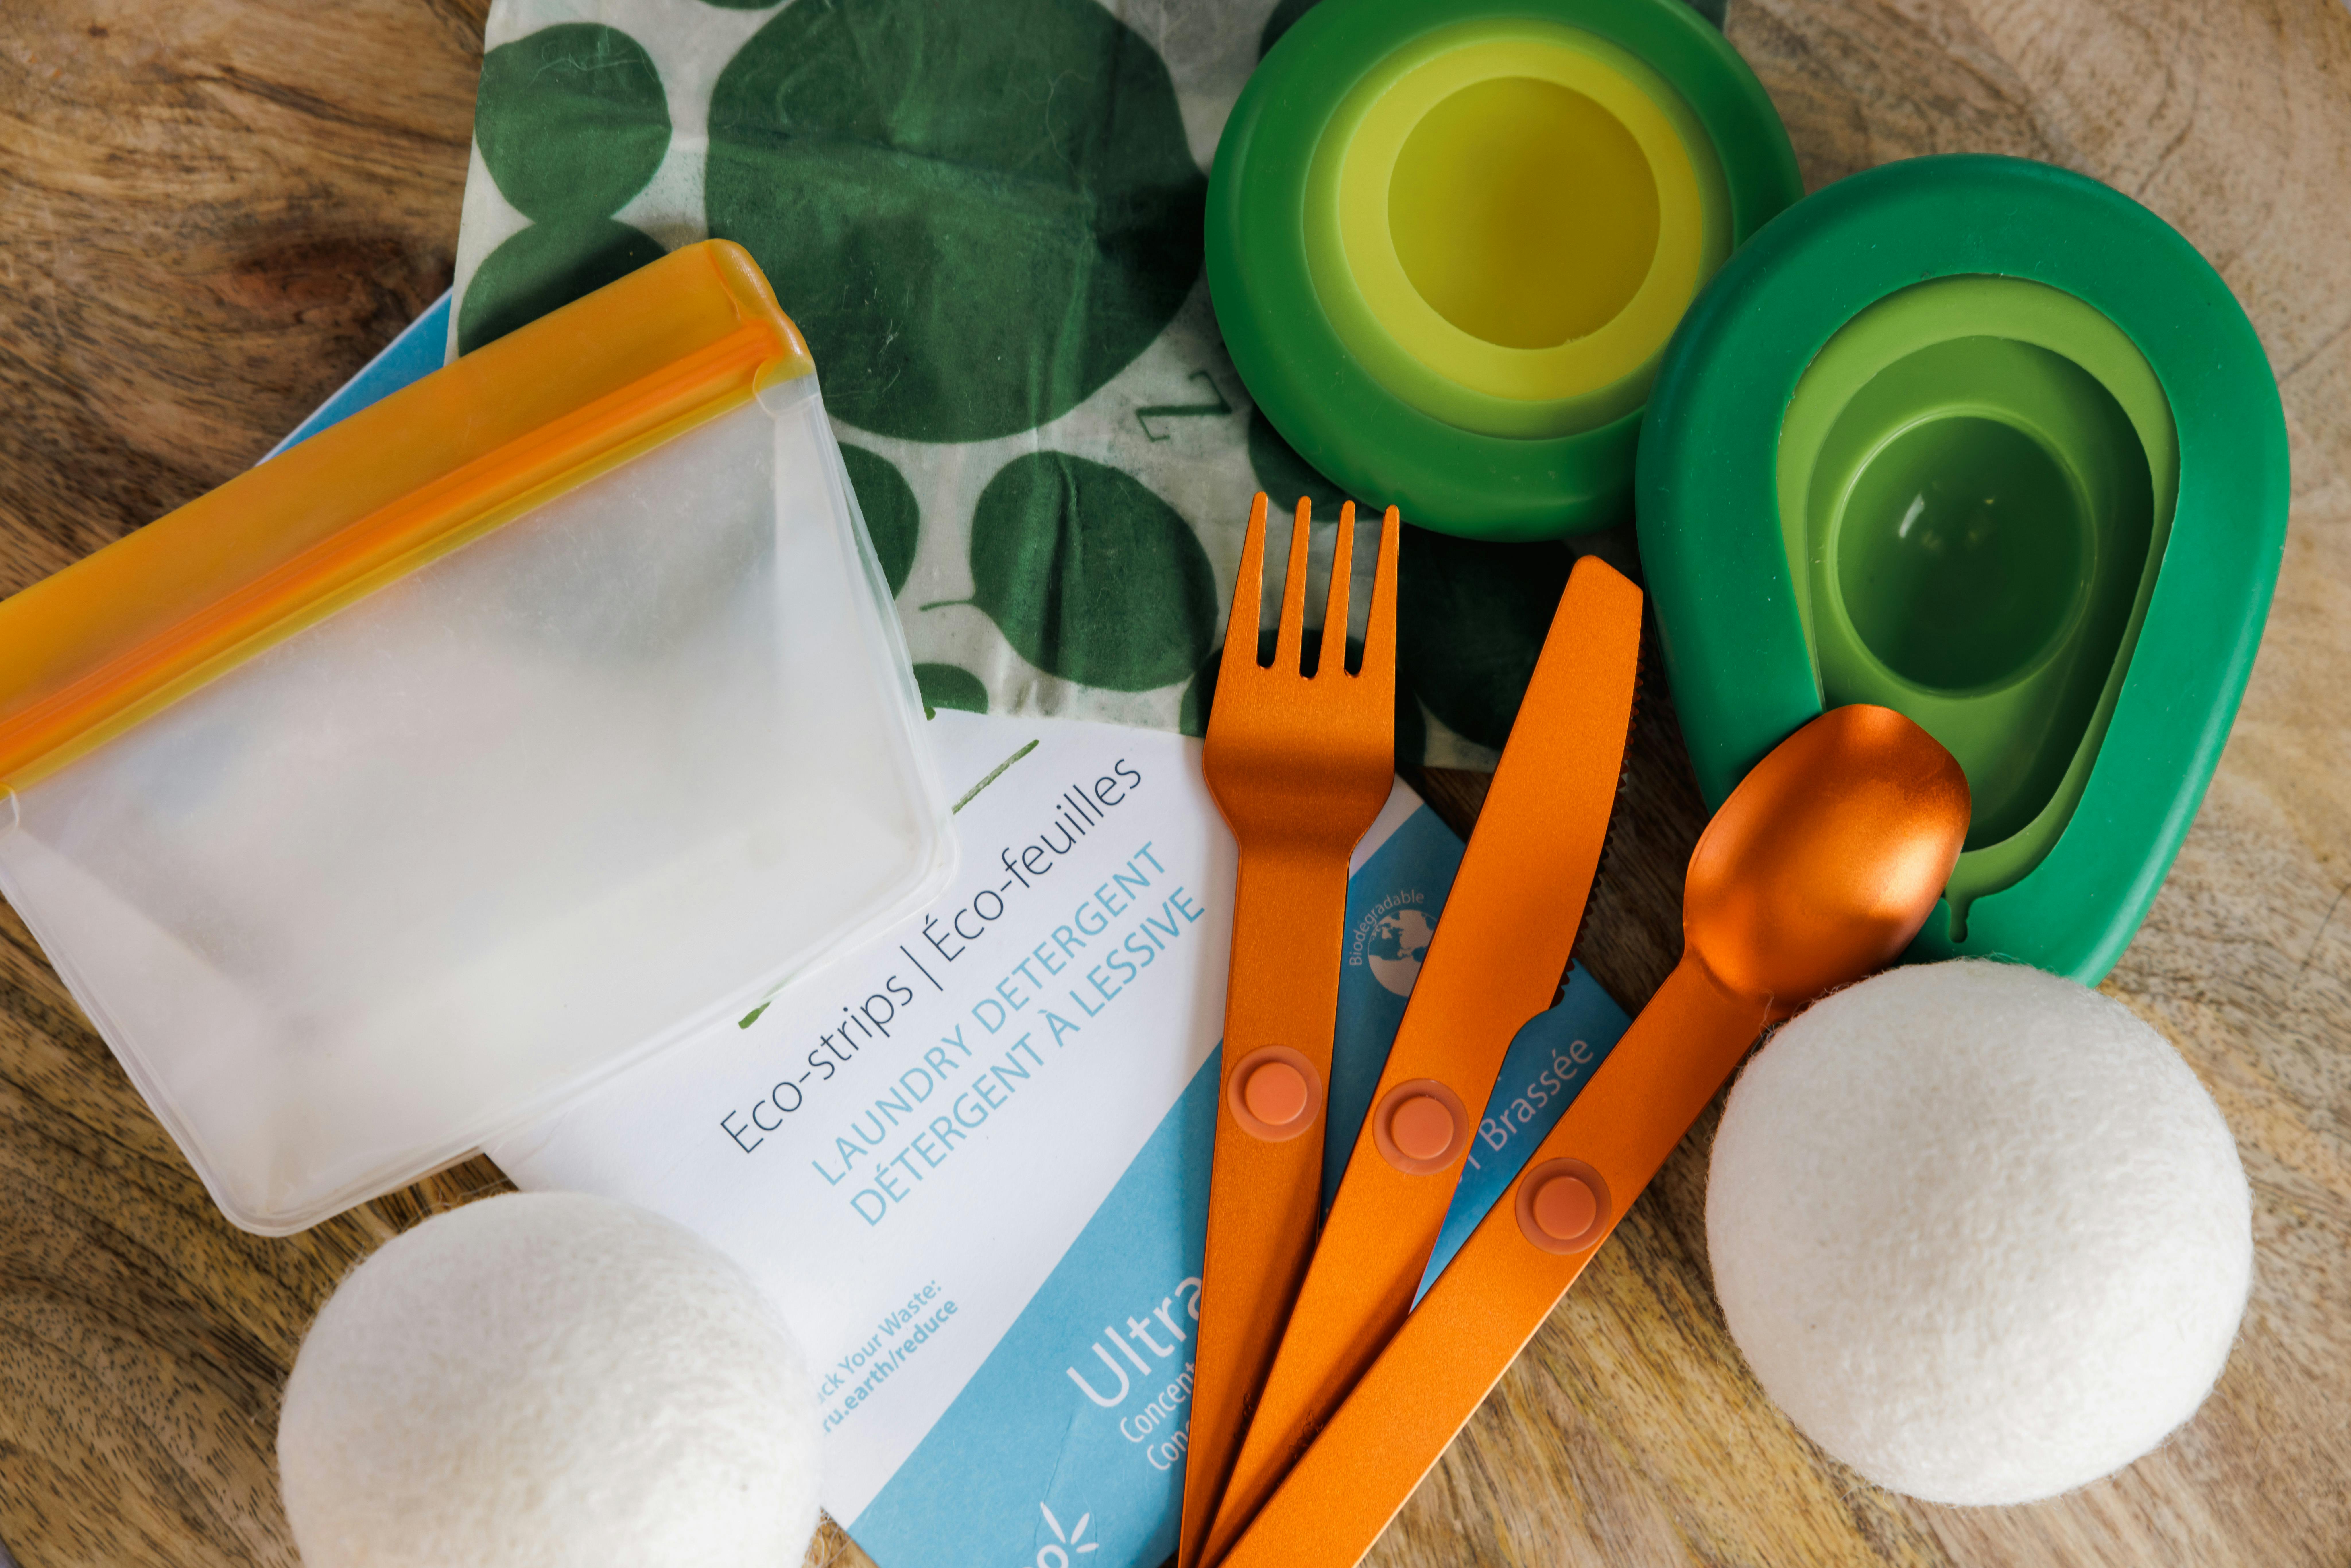 Karen Blue's sustainable products such as reusable utensils, wax paper and eco-friendly laundry detergent 